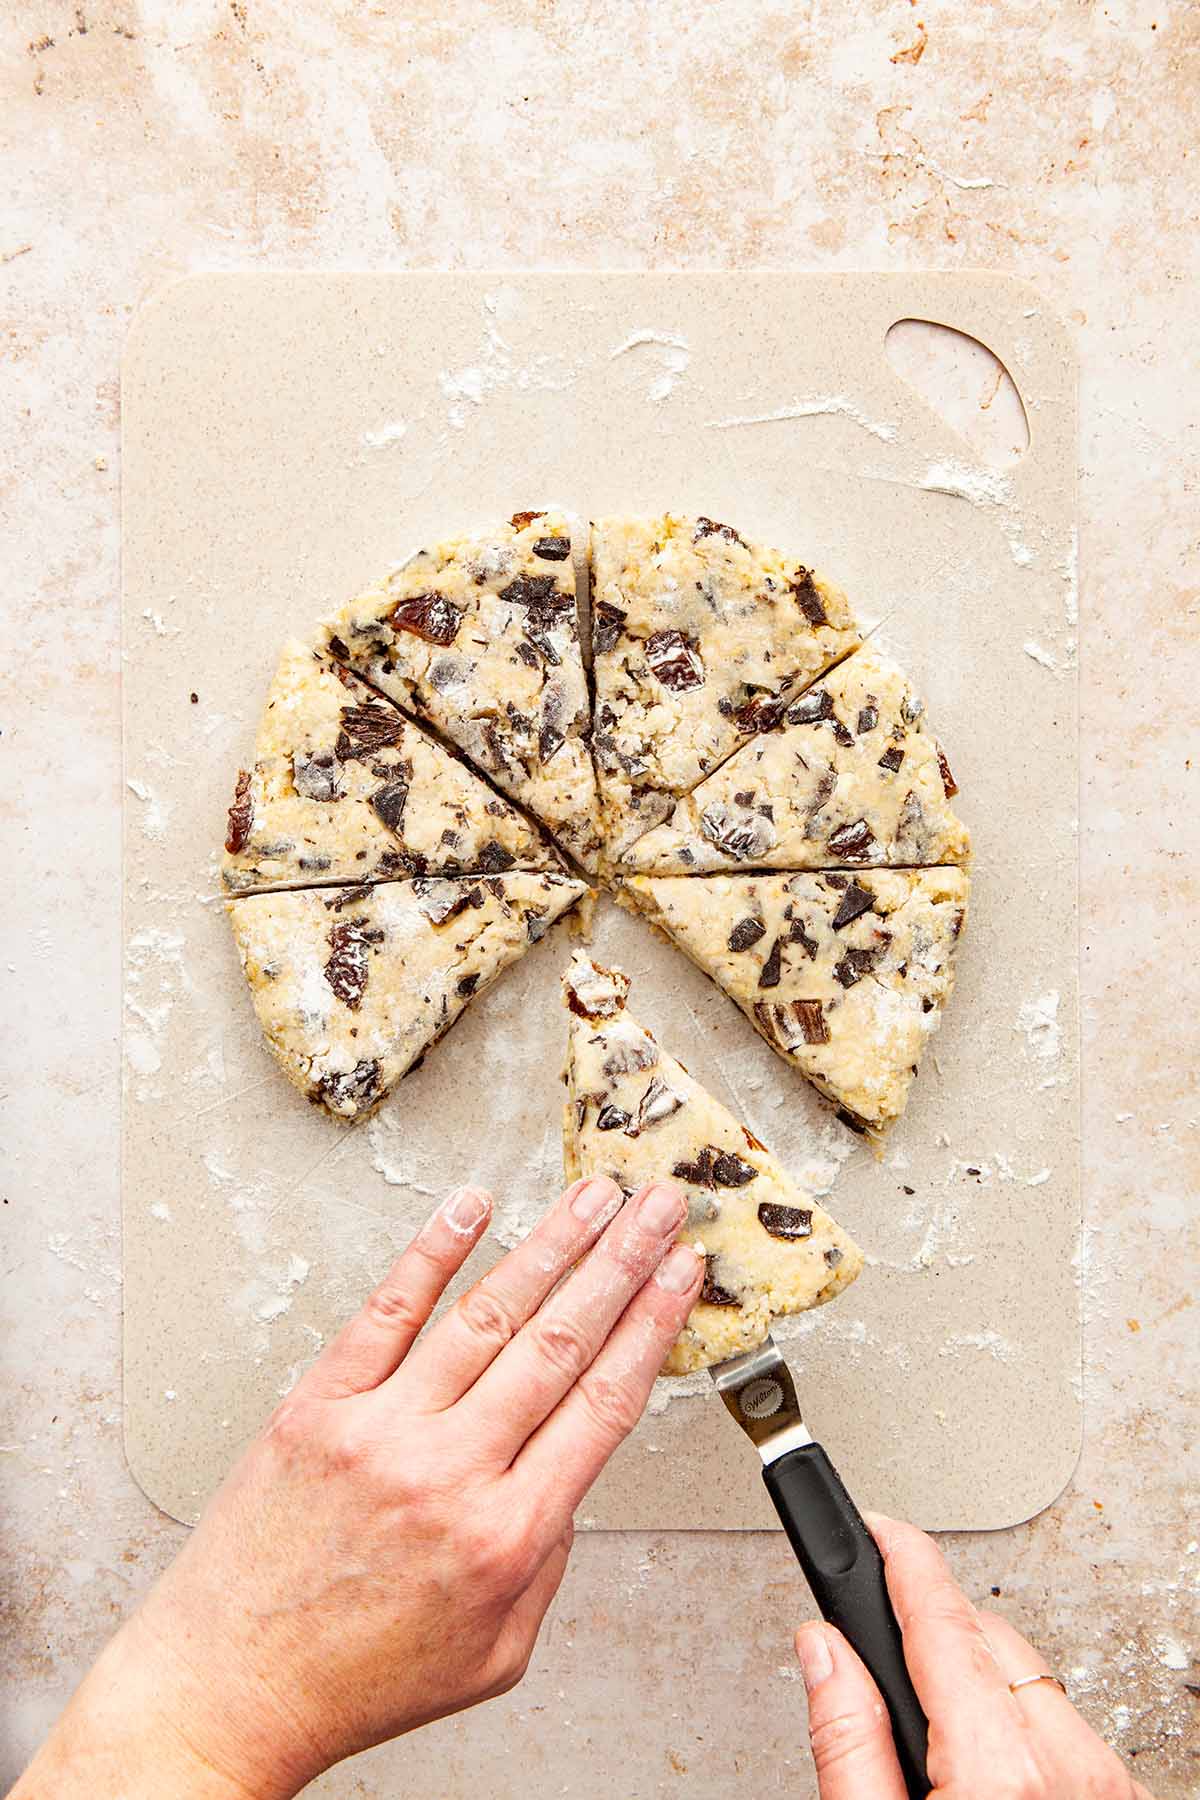 Hands lifting a scone from a work surface with a small offset spatula.